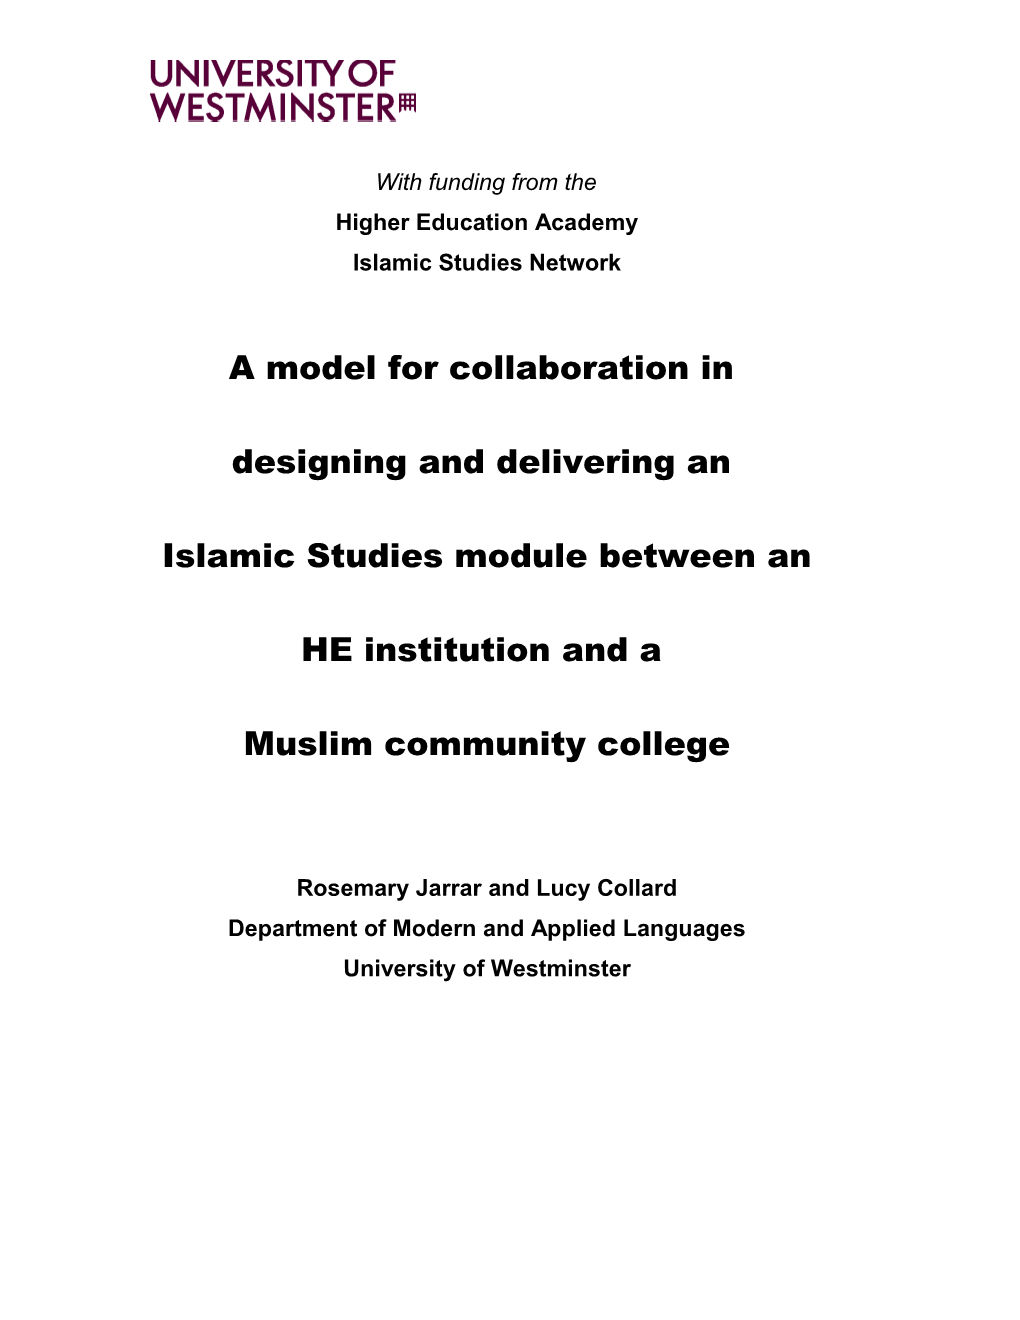 A Model for Collaboration Between an HEI and a Muslim College